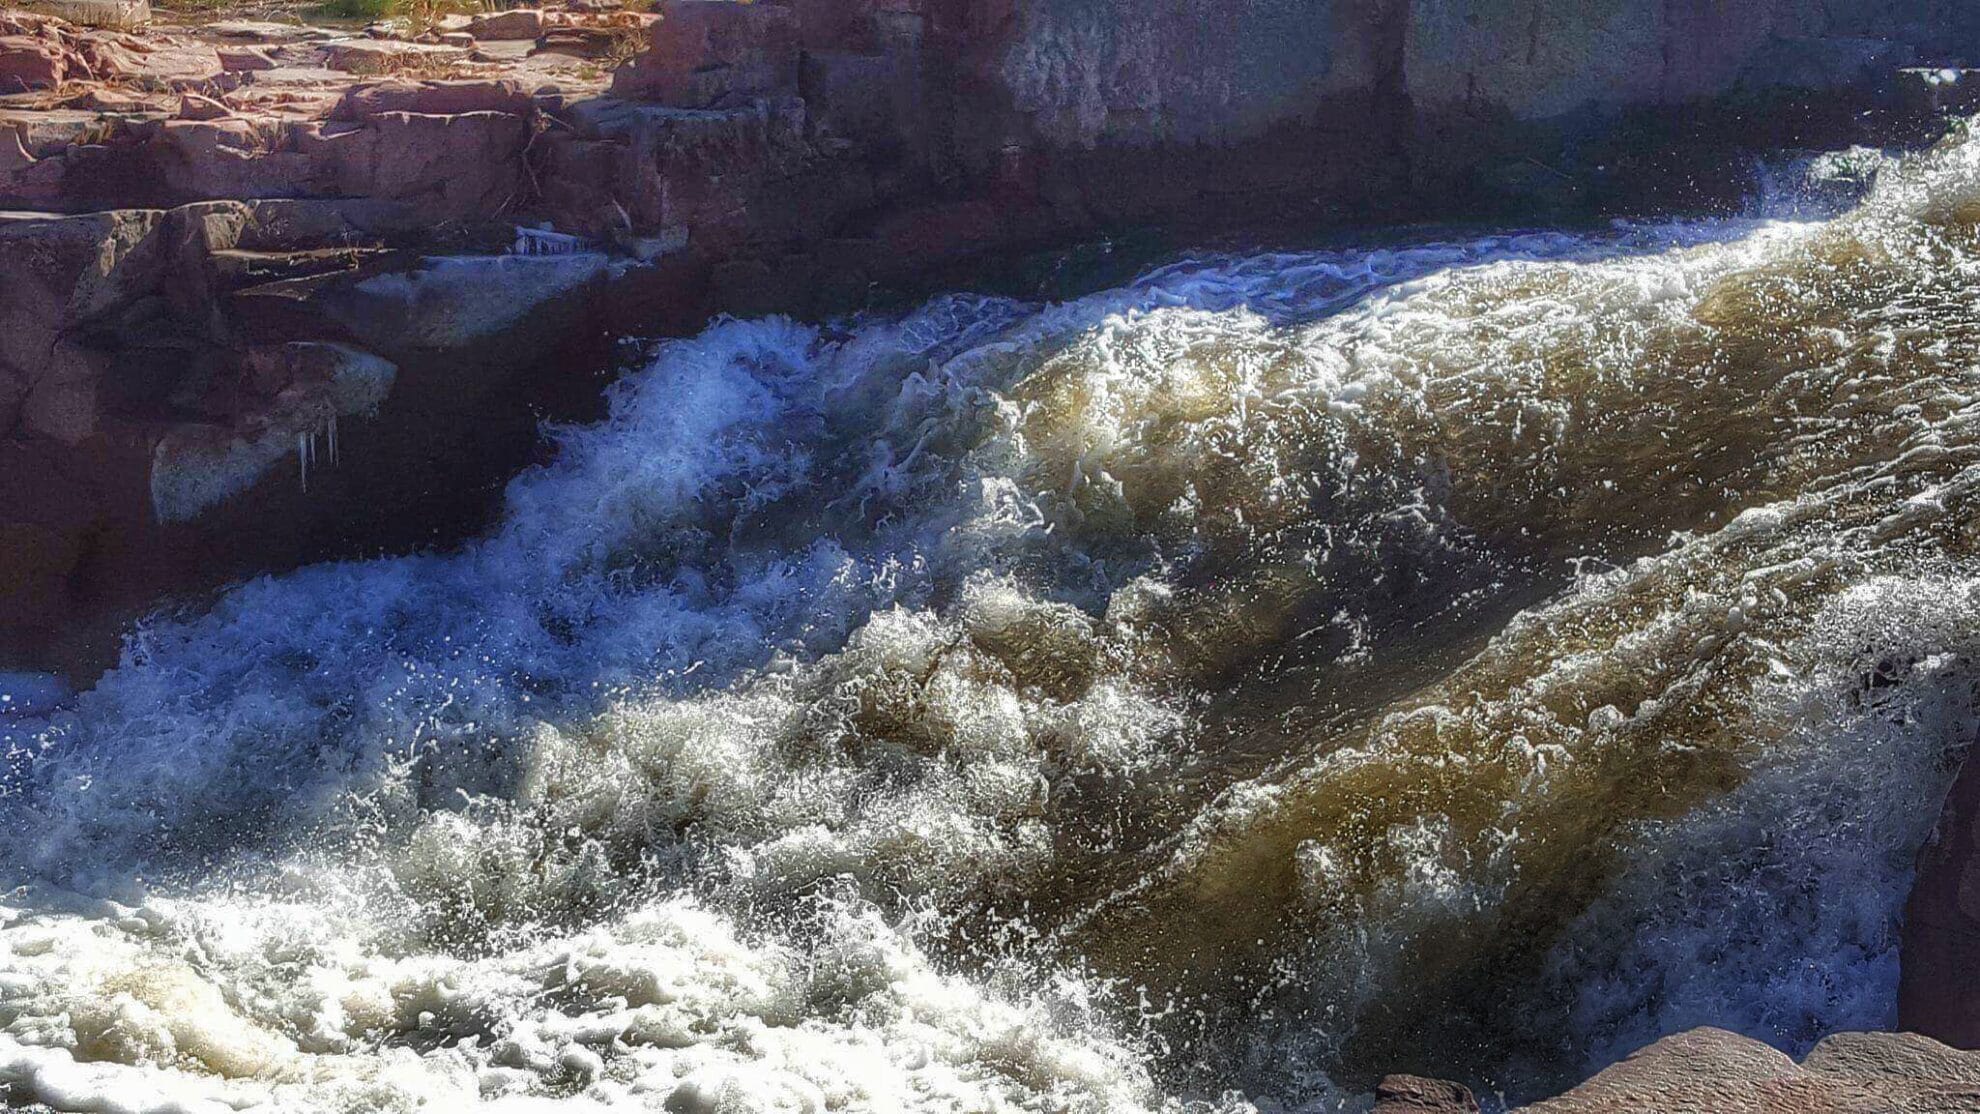 Known for its outdoor activities, restaurants, art and culture, Sioux Falls is a great place to visit for a weekend getaway getaway or family vacation.